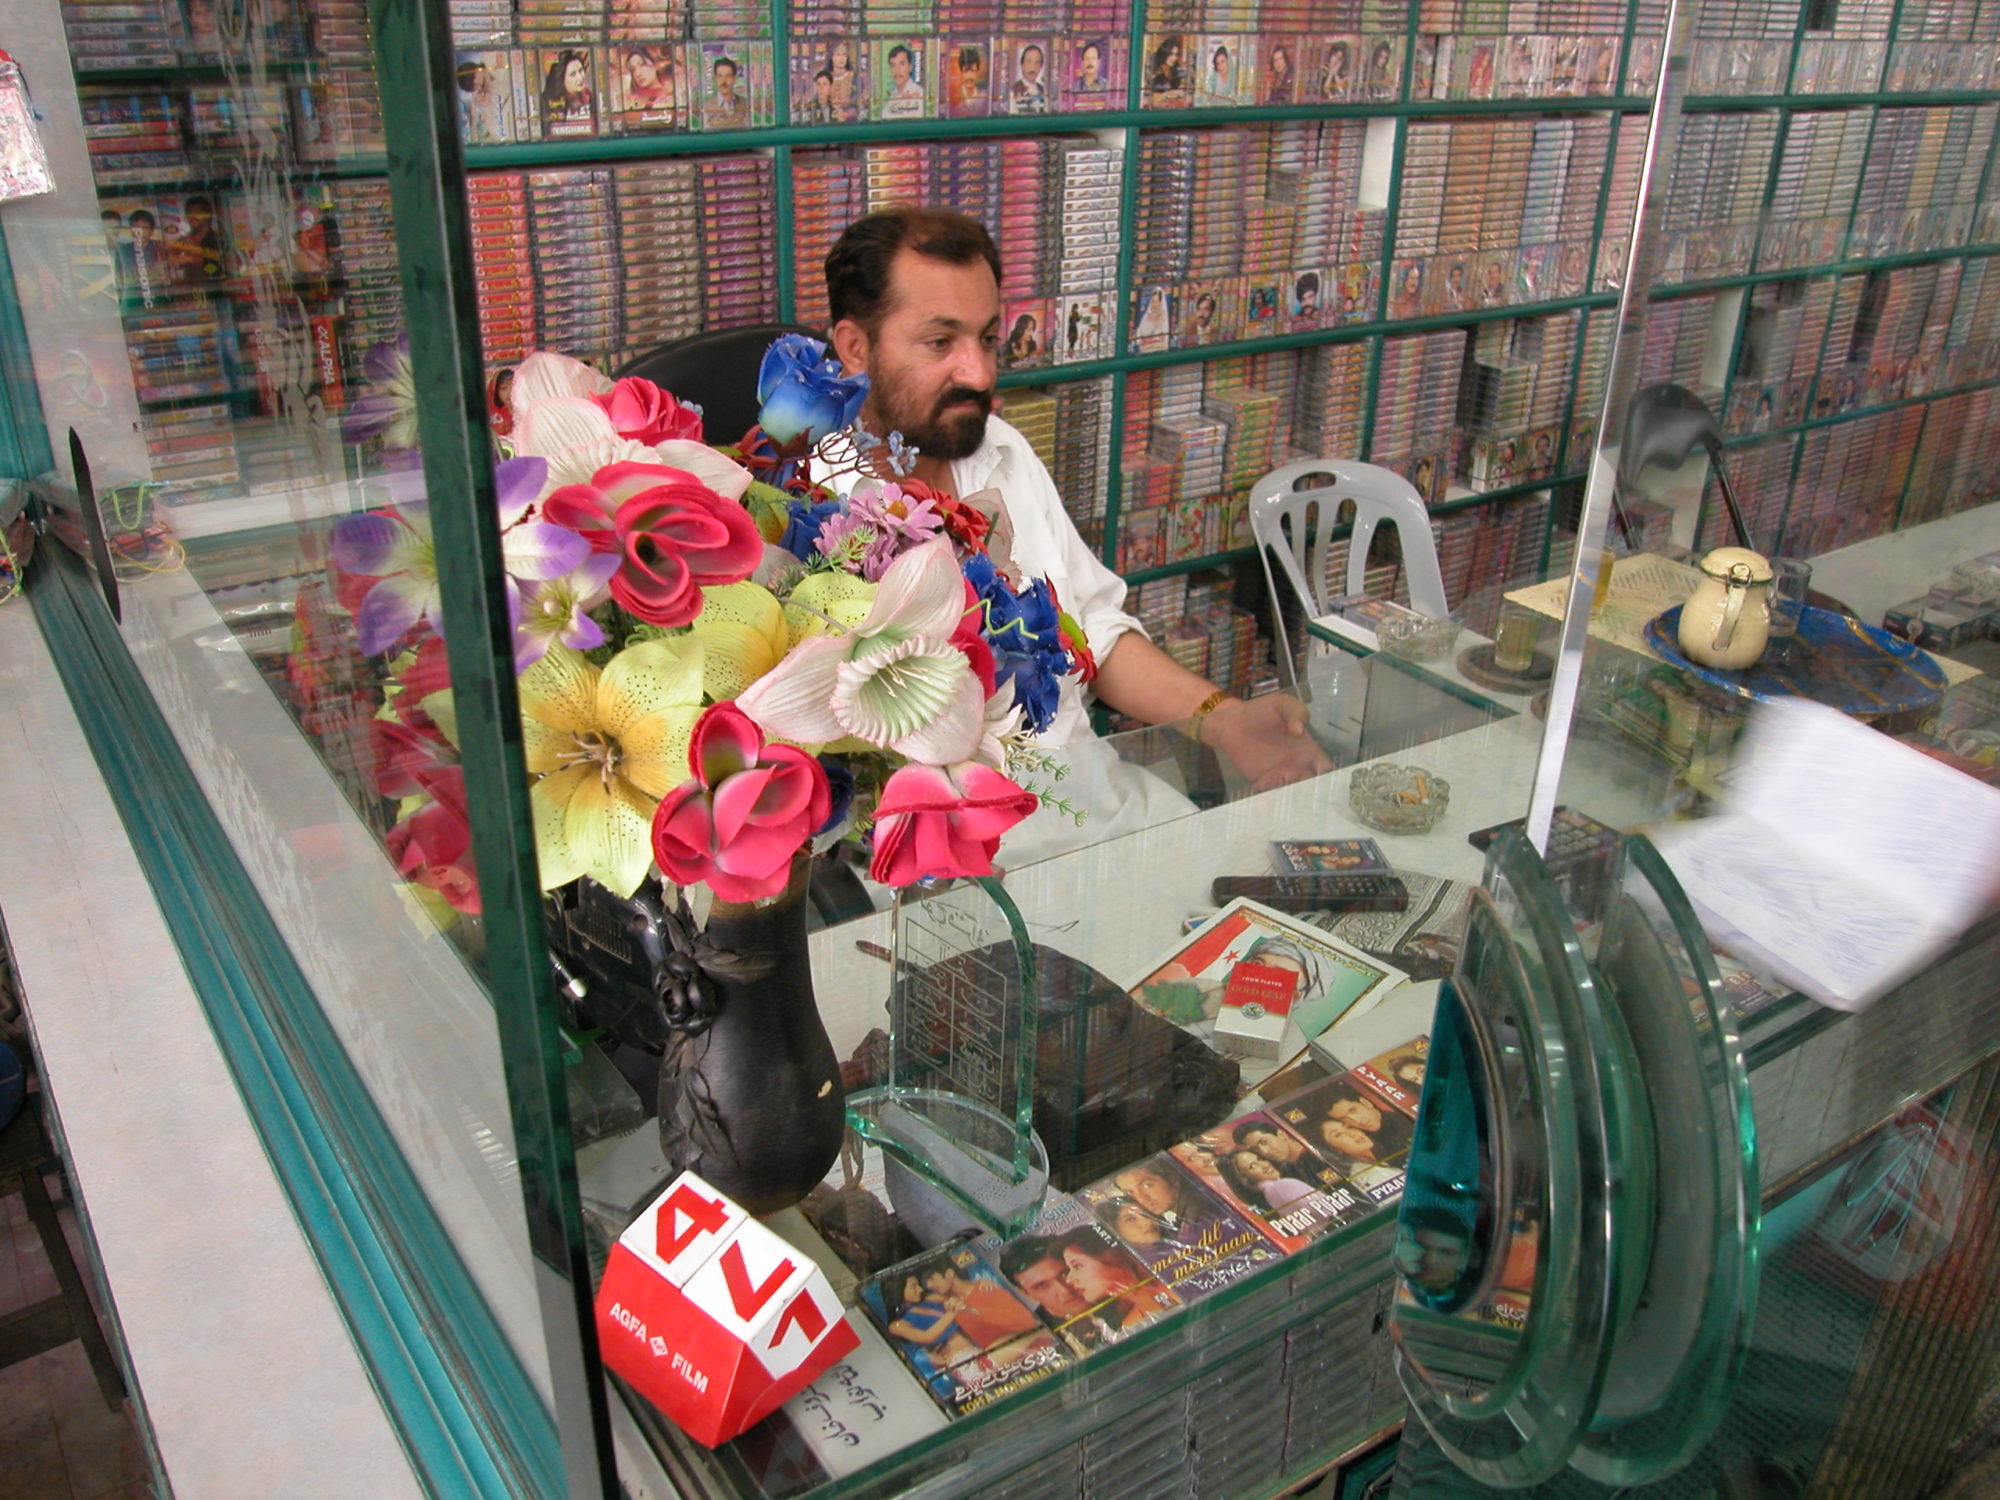 A man behind the counter in a cassette shop